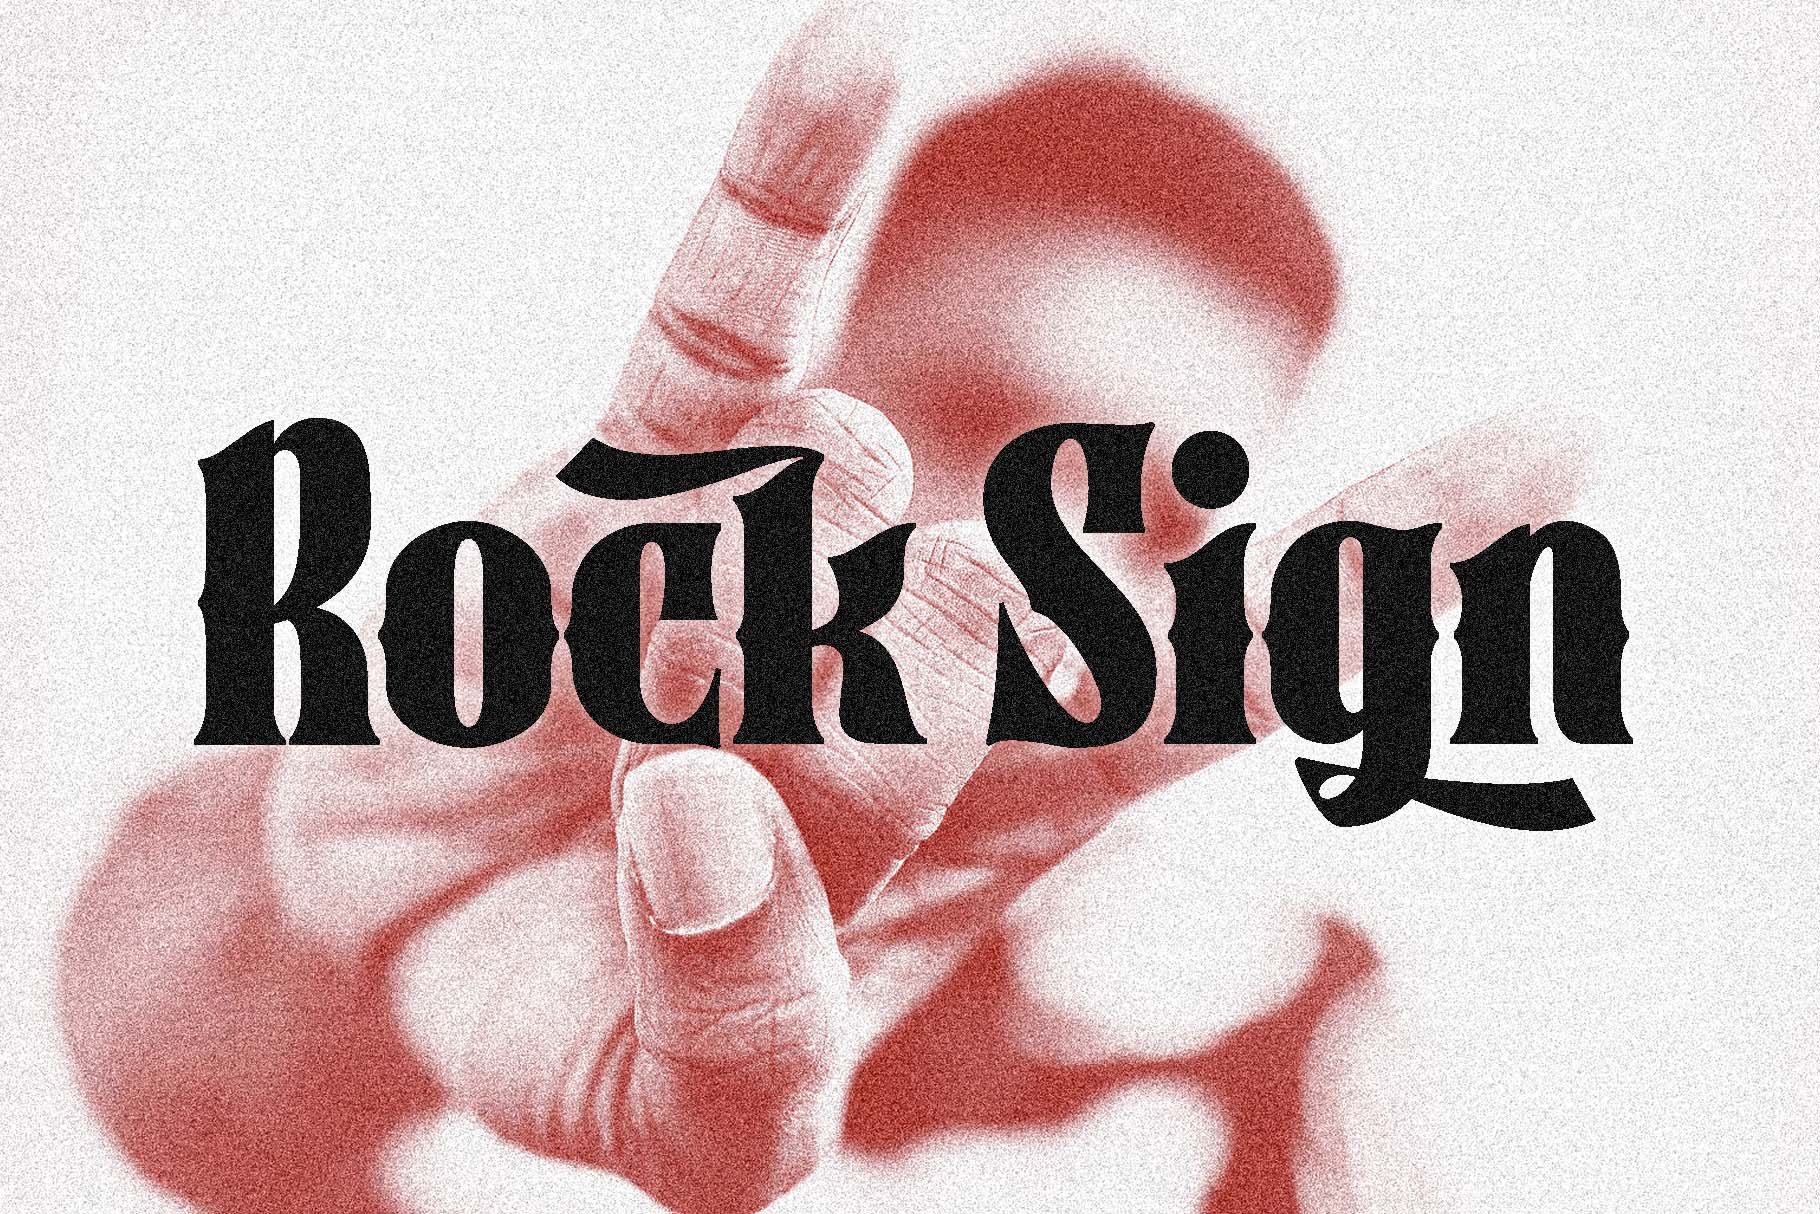 Rock Sign Typefacecover image.